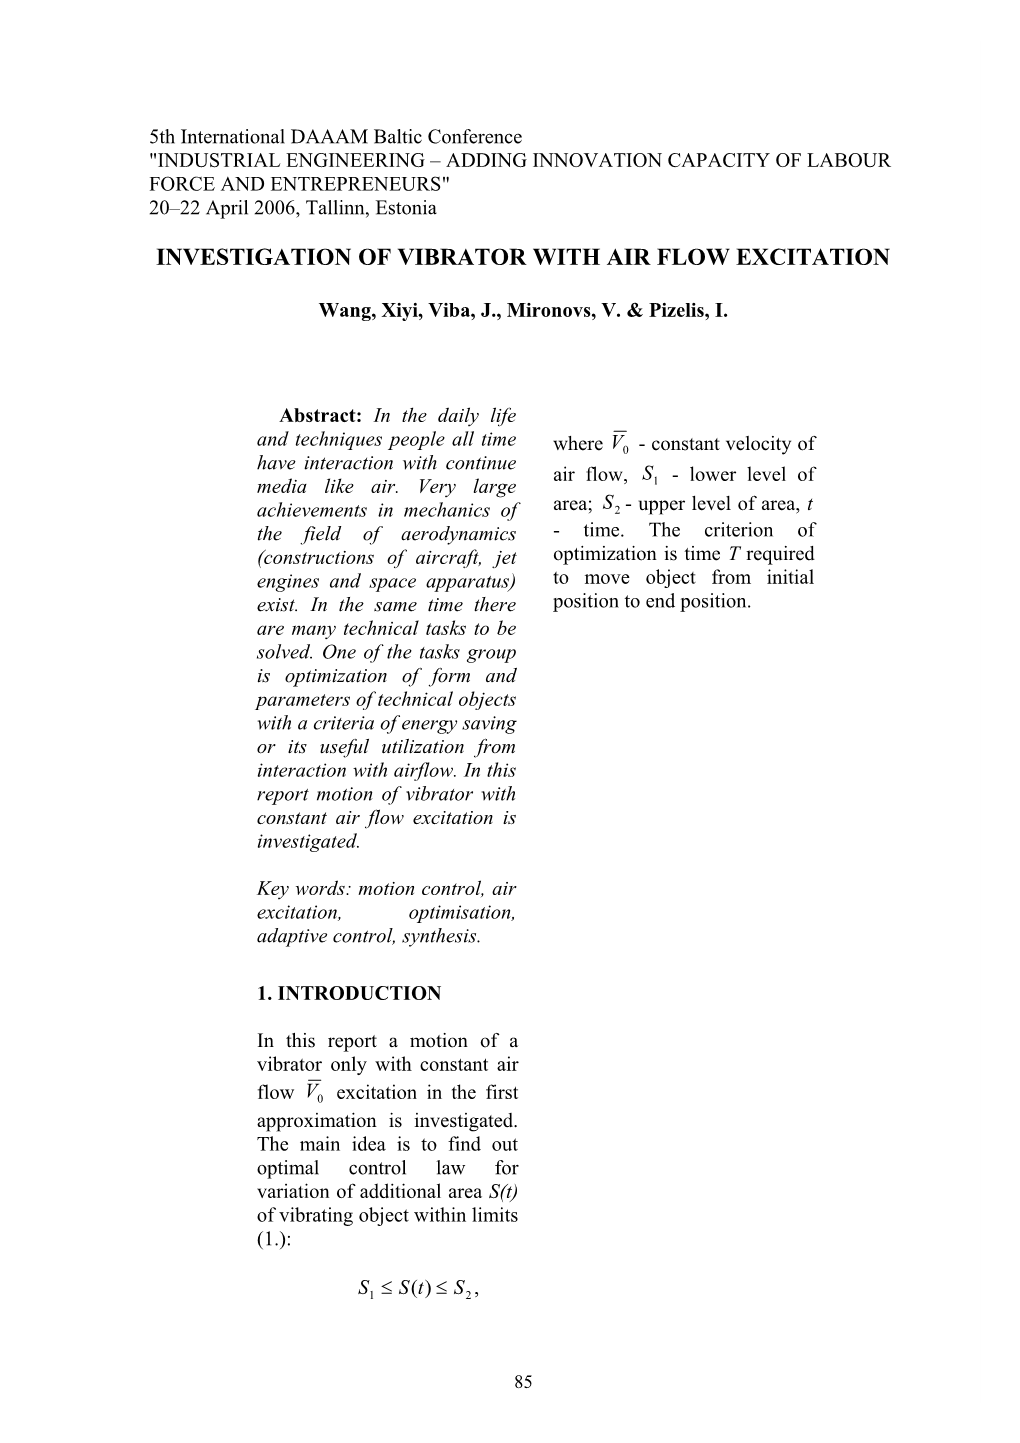 Investigation of Vibrator with Air Flow Excitation